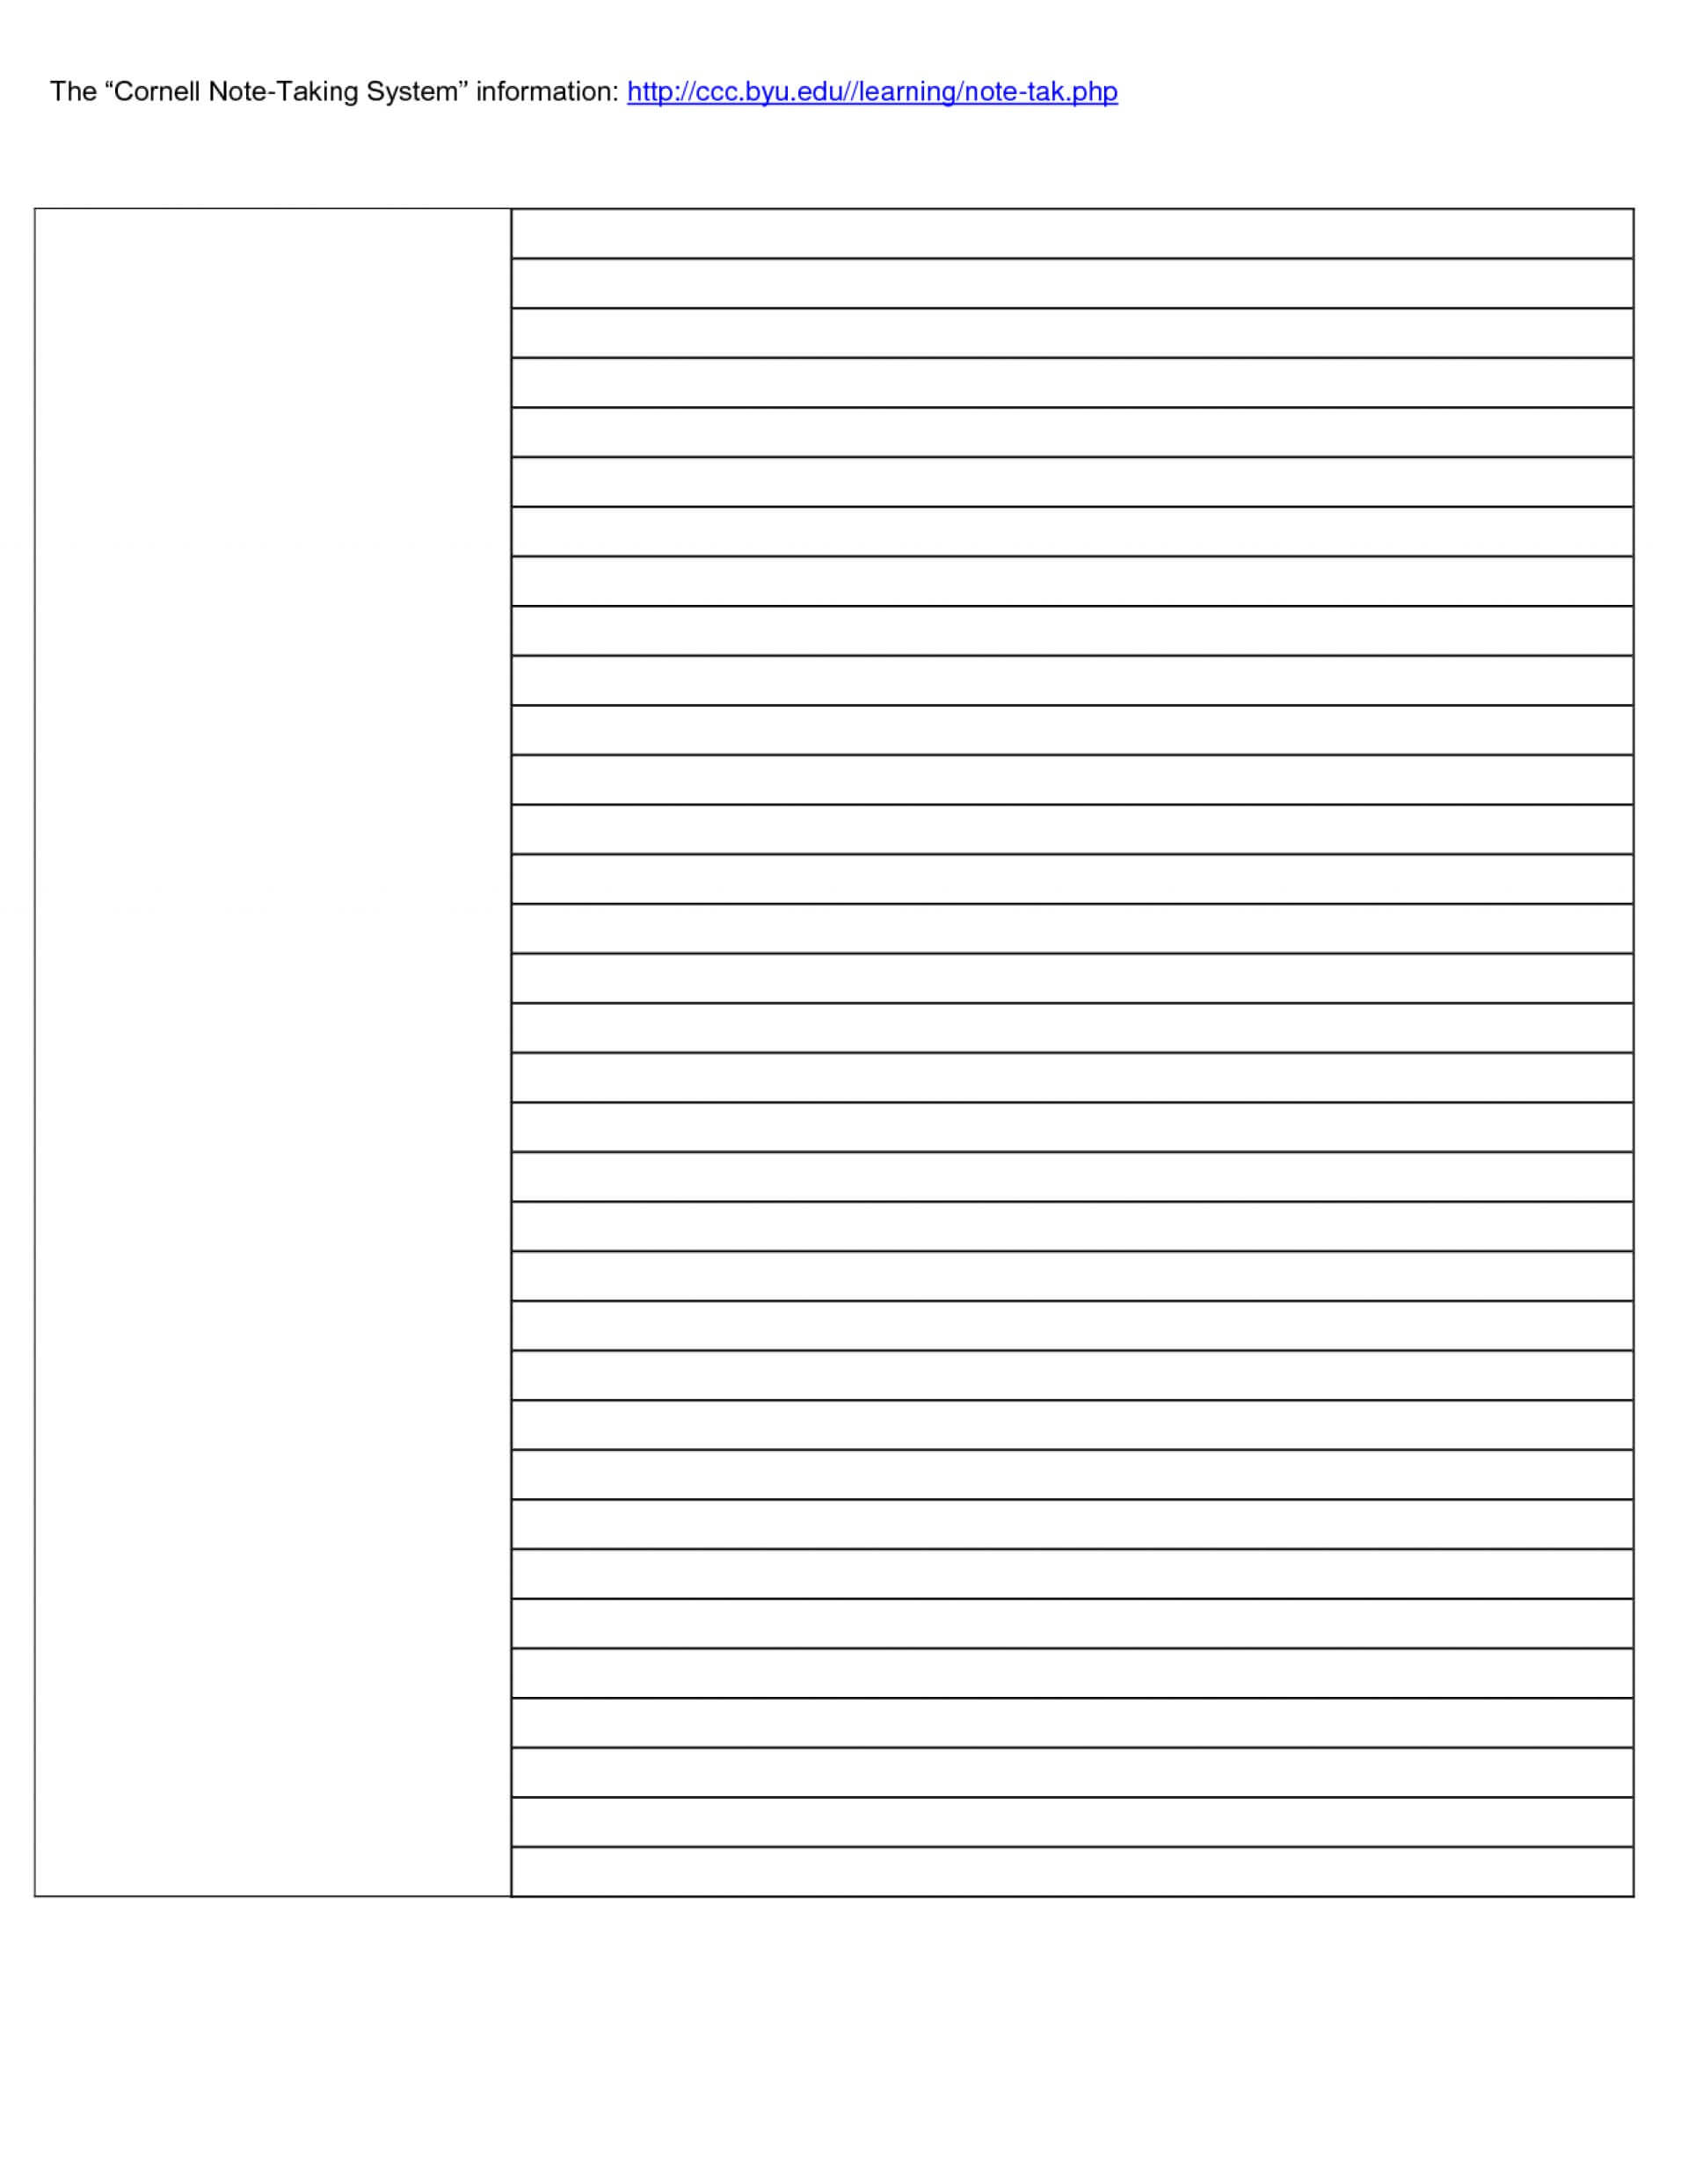 005 Note Taking Template Word Ideas Unforgettable Cornell Intended For Note Taking Template Word